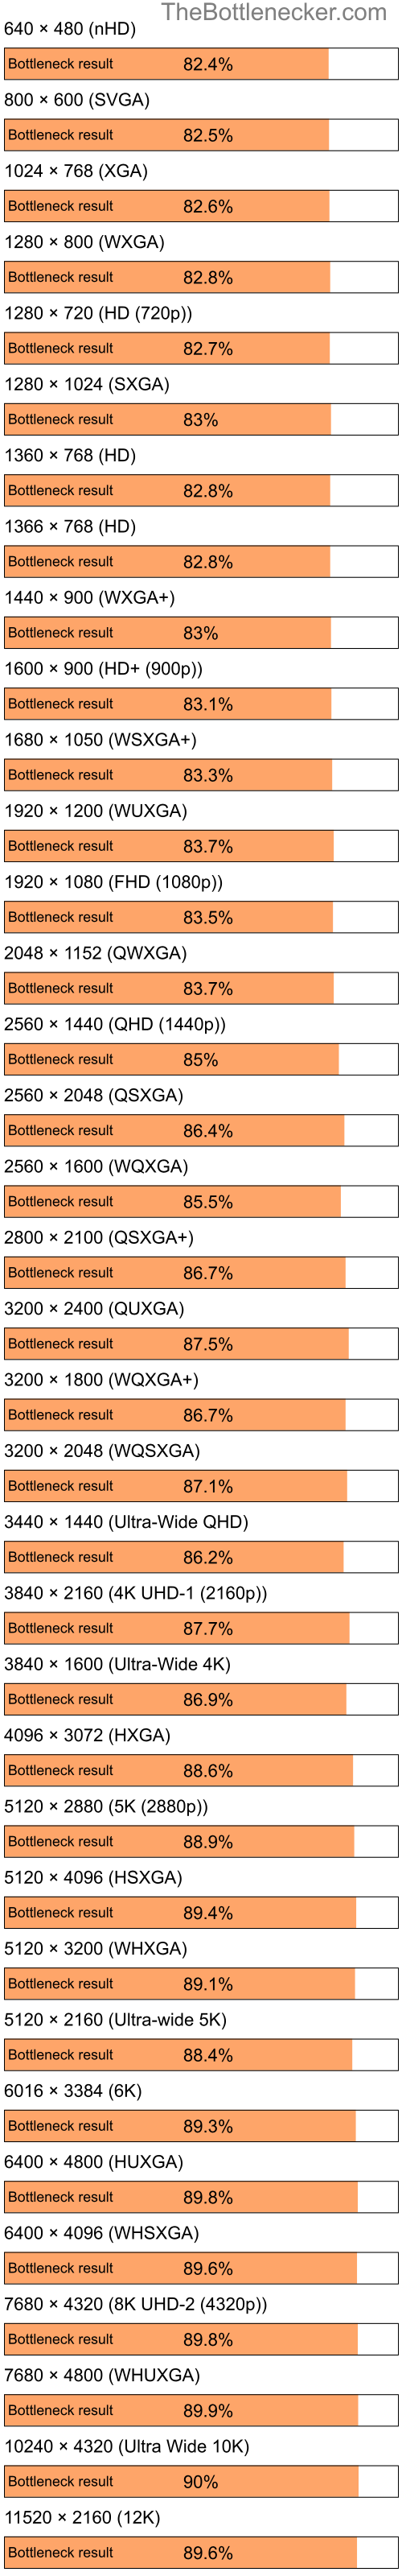 Bottleneck results by resolution for Intel Pentium 4 and AMD Radeon 9550 in Graphic Card Intense Tasks